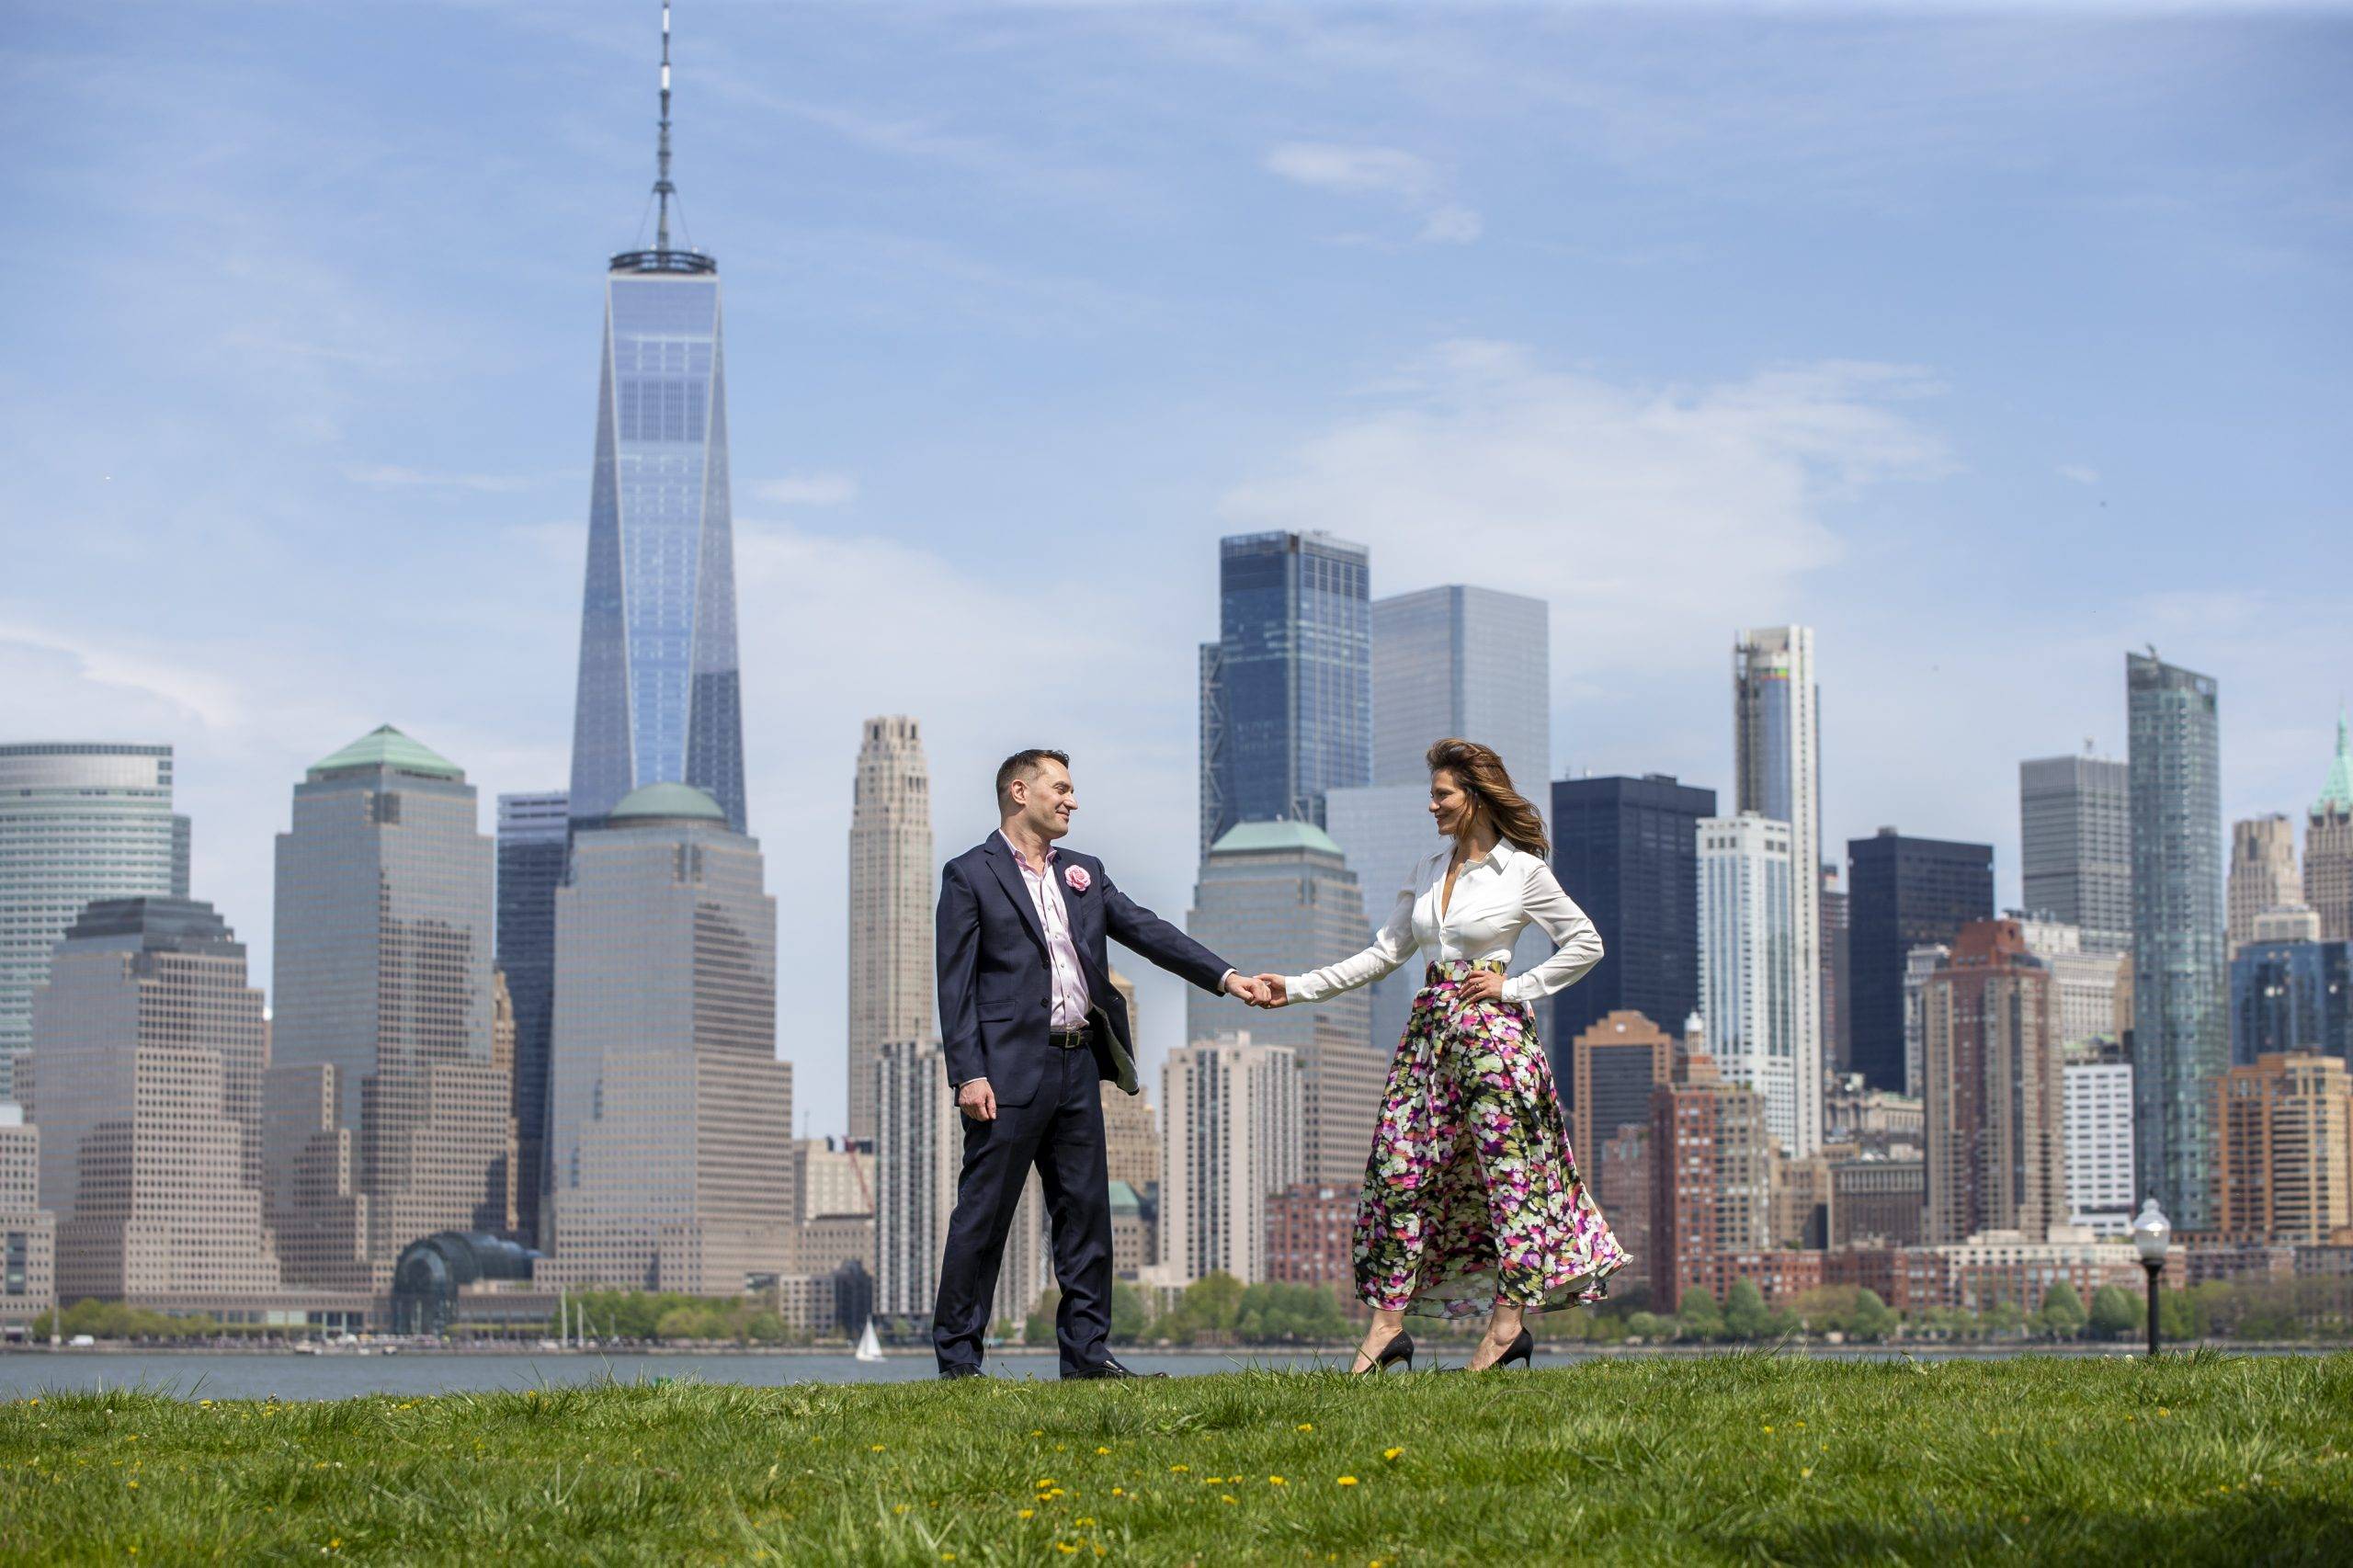 A man and woman holding hands in front of a city skyline.